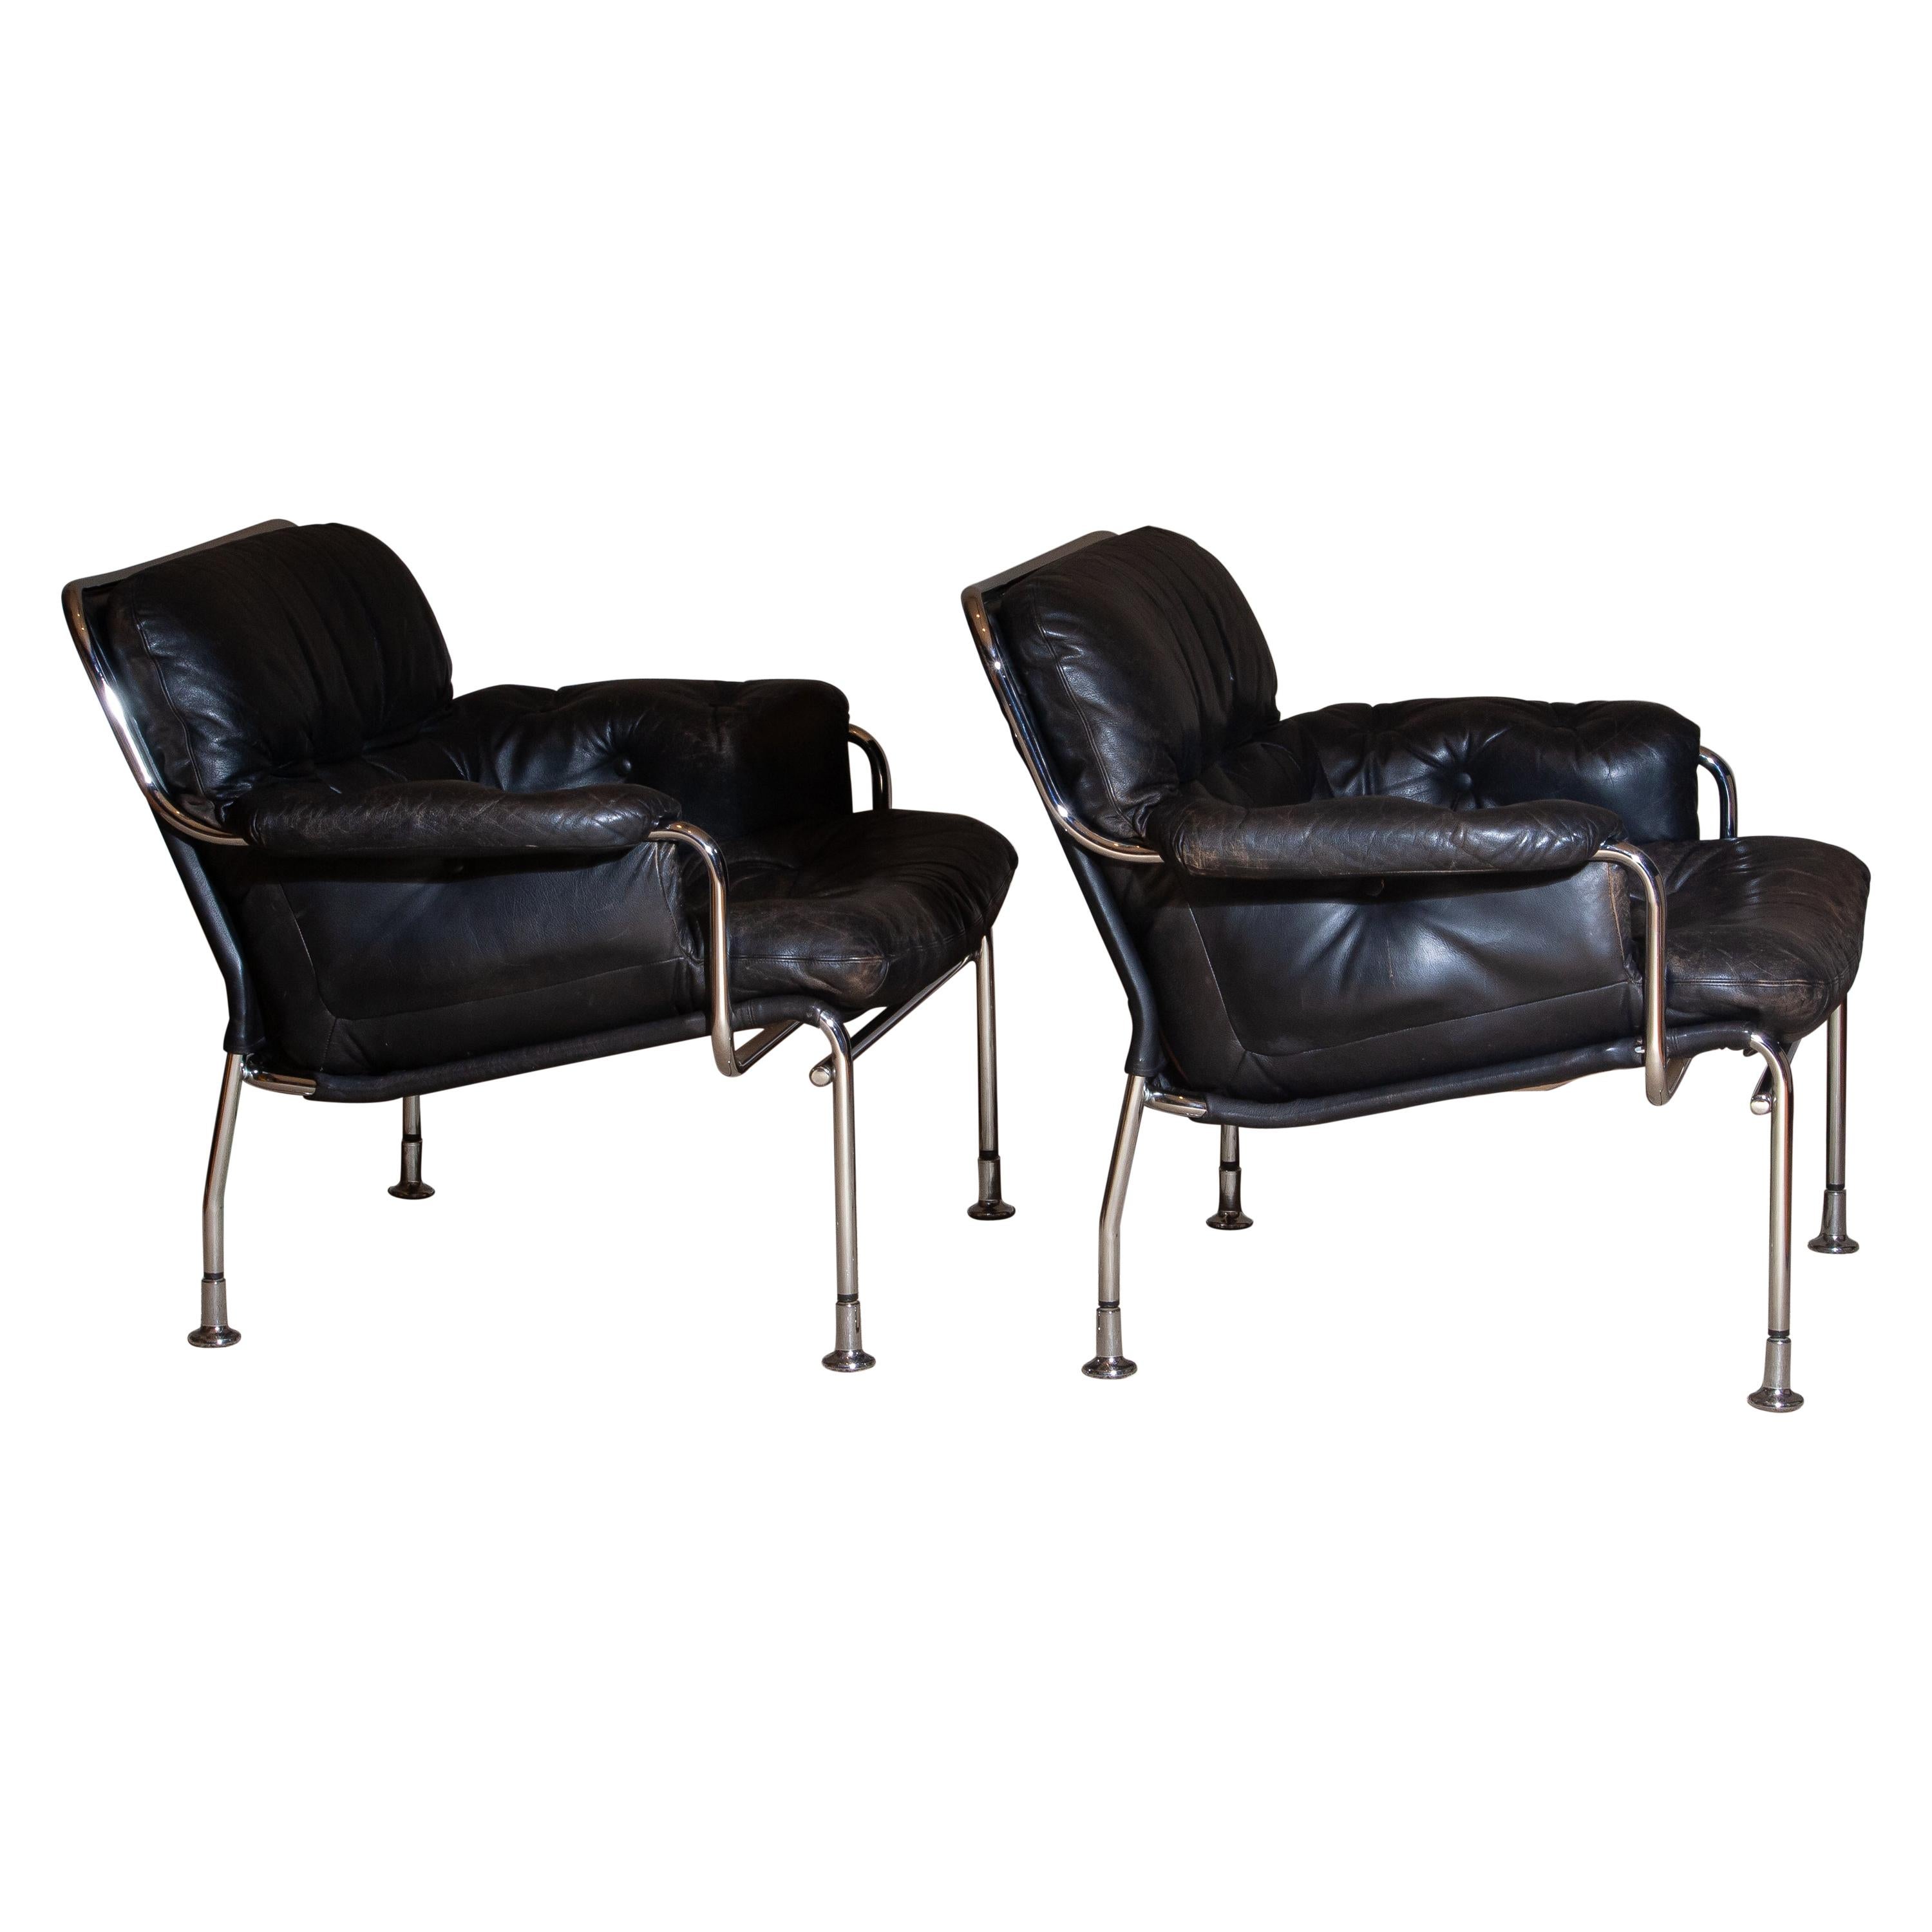 Swedish 1960s Set of Two Eva Lounge Chairs in Chrome and Aged Black Leather by Lindlöfs